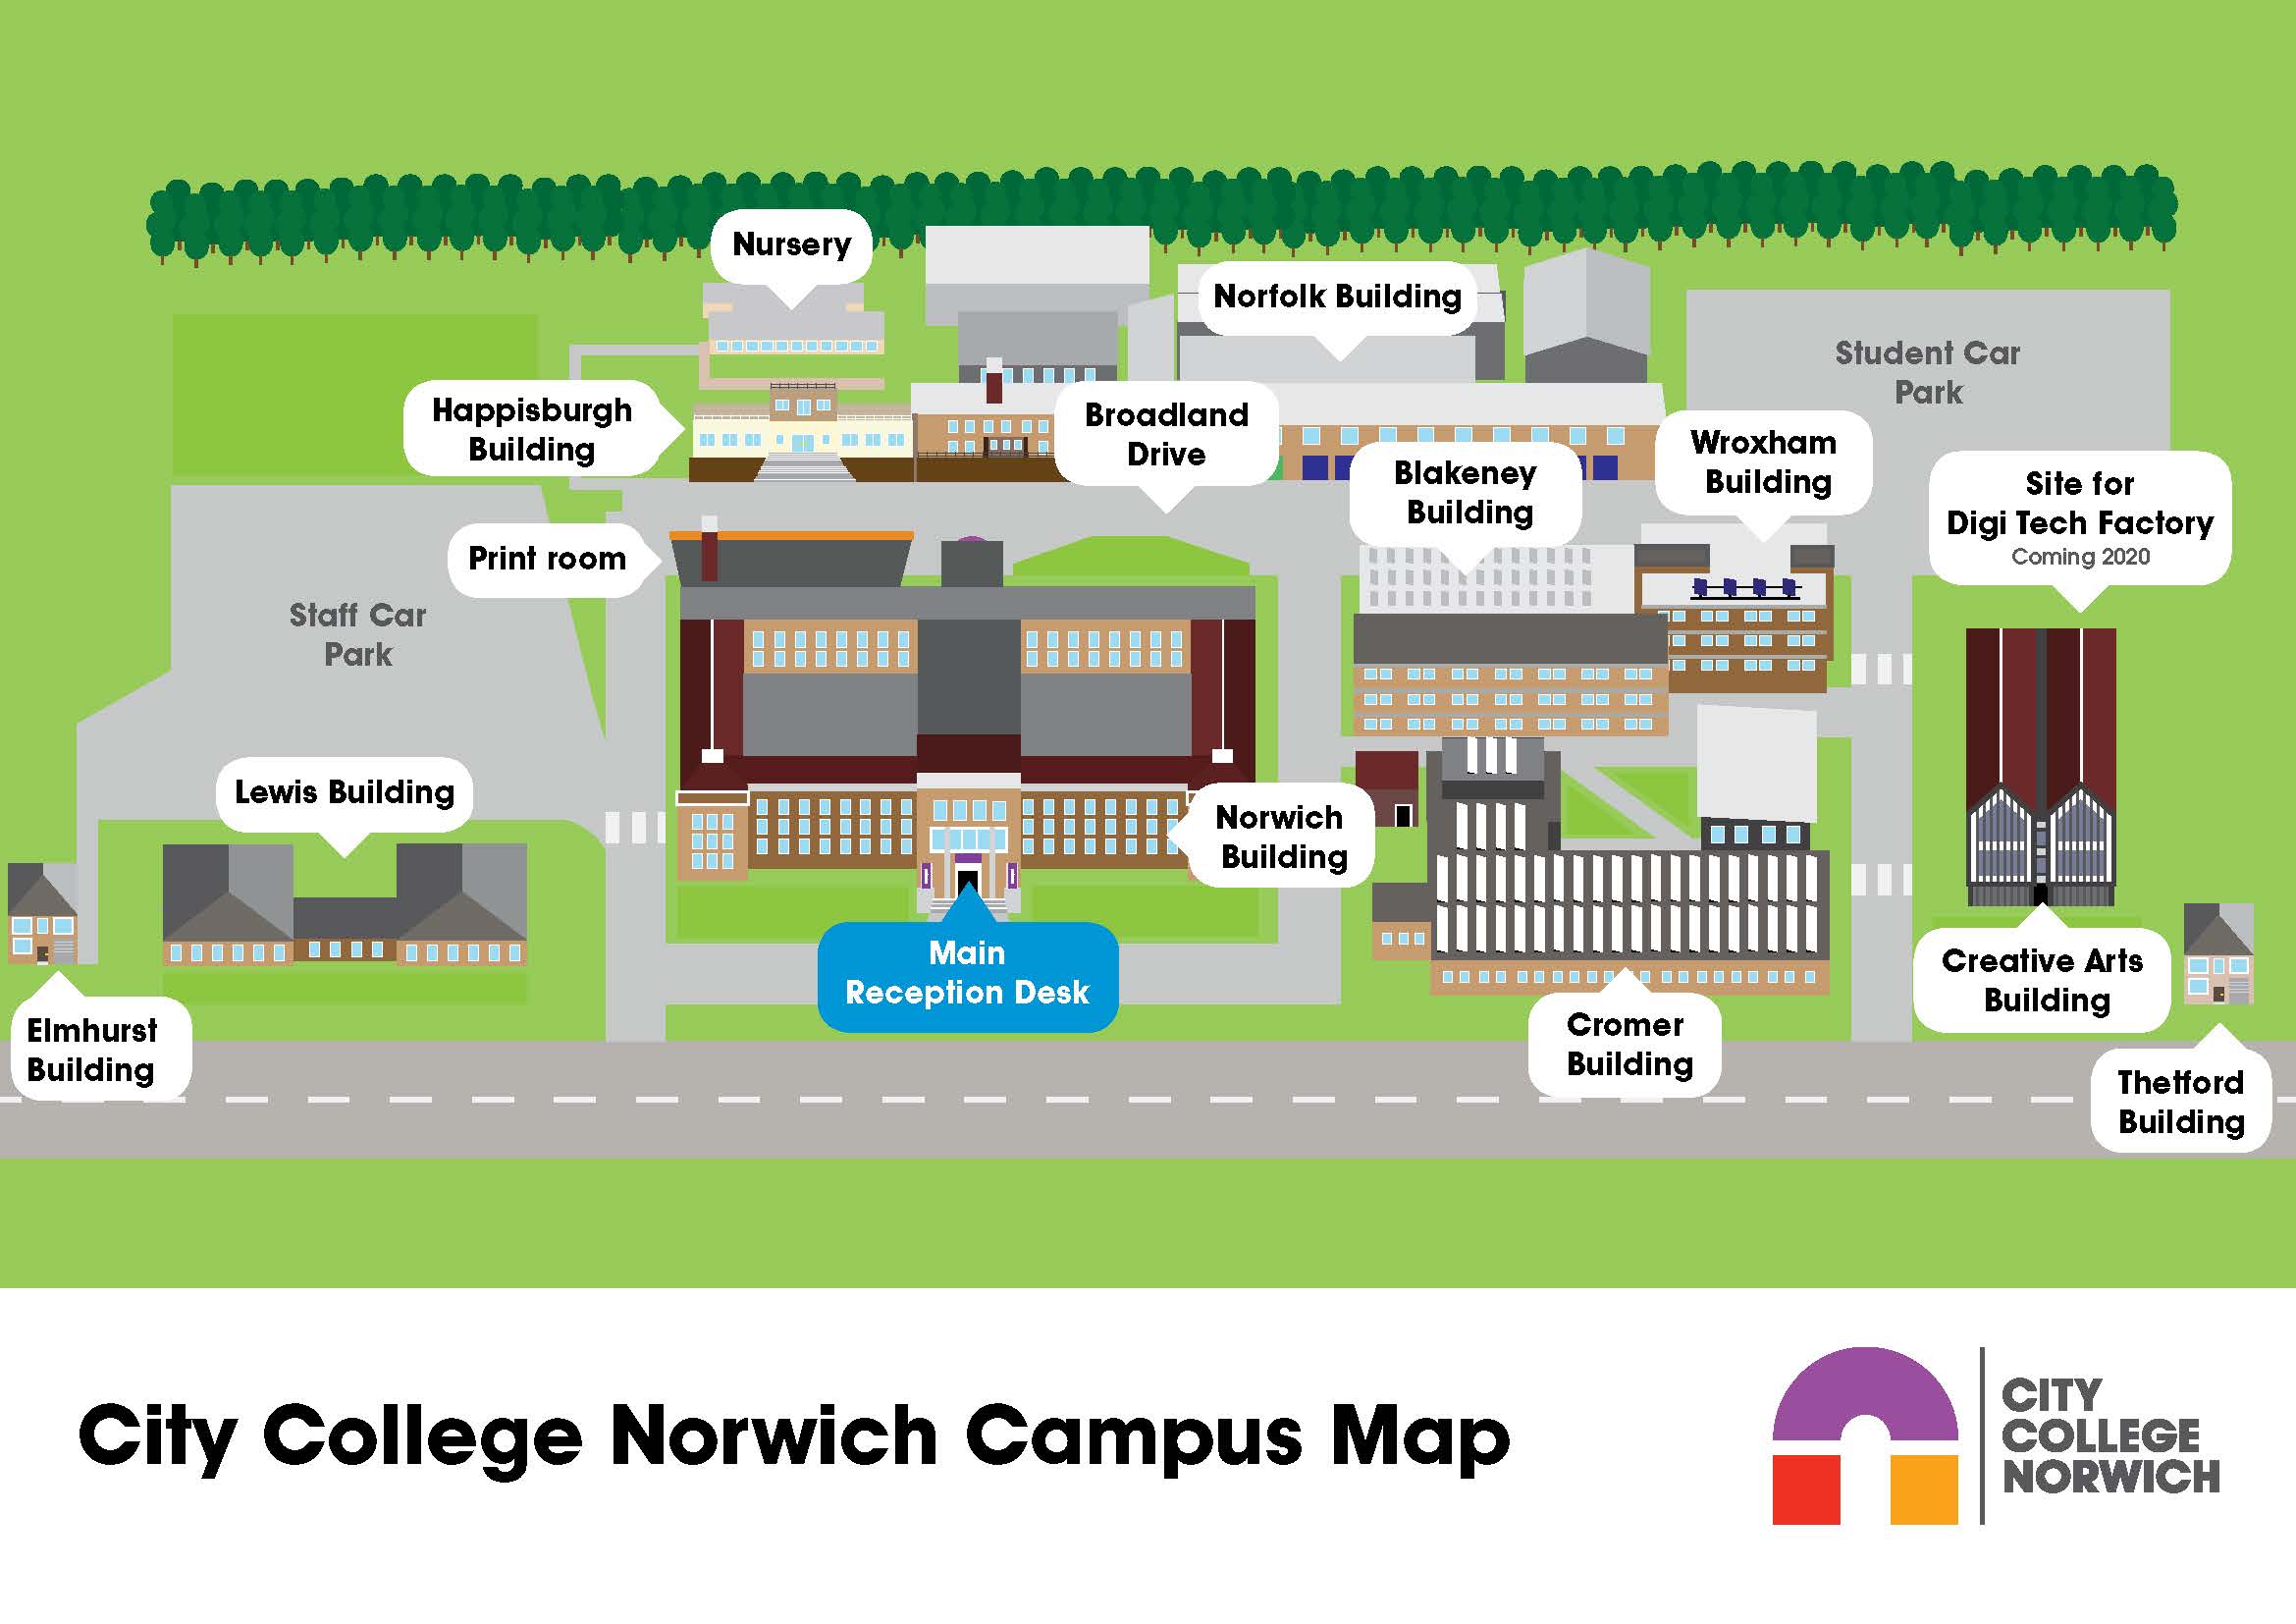 City College Norwich Campus Map